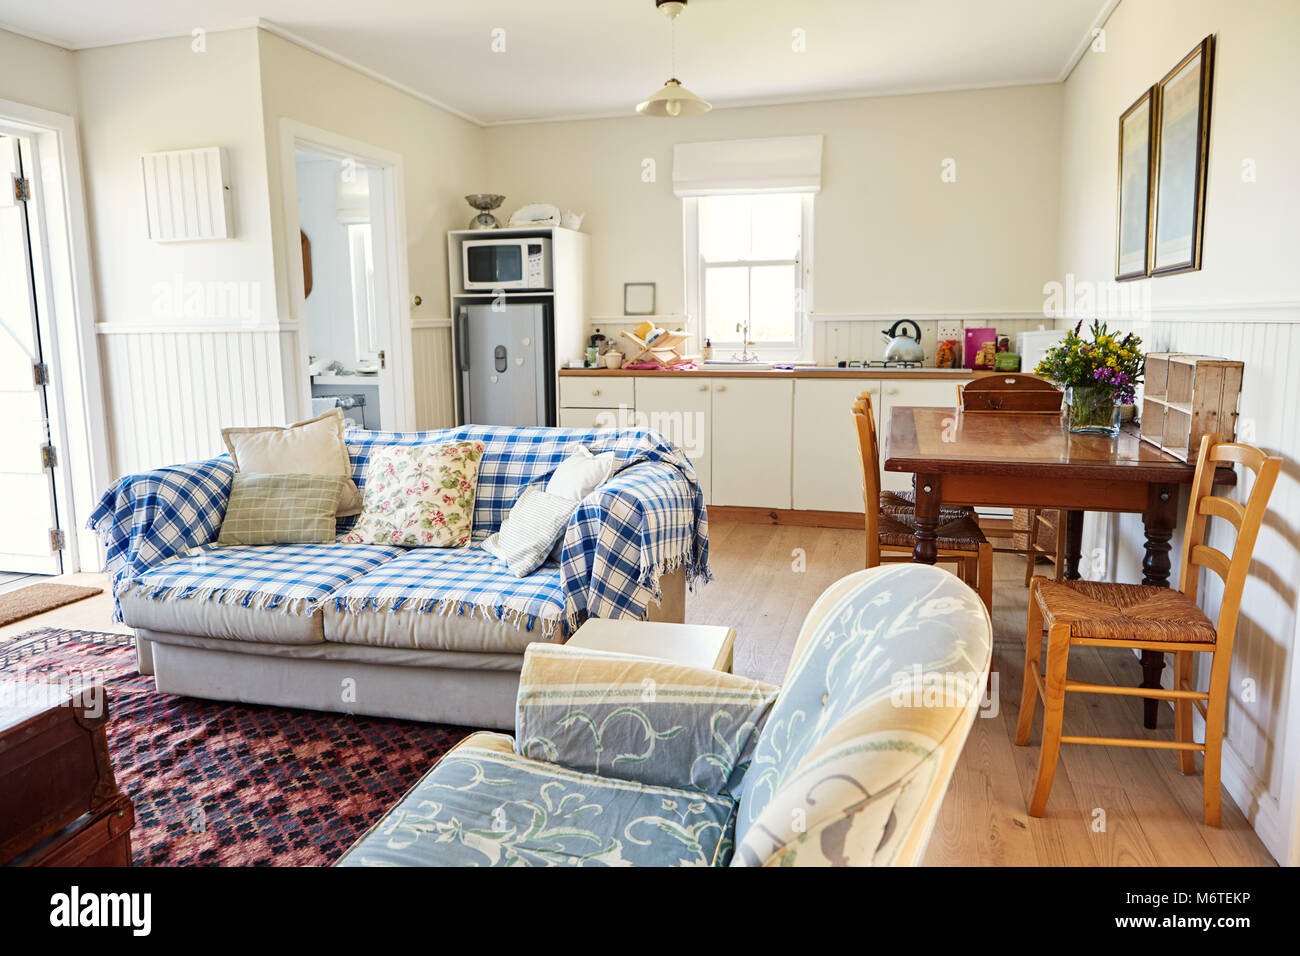 Lounge and kitchen in a small country home Stock Photo